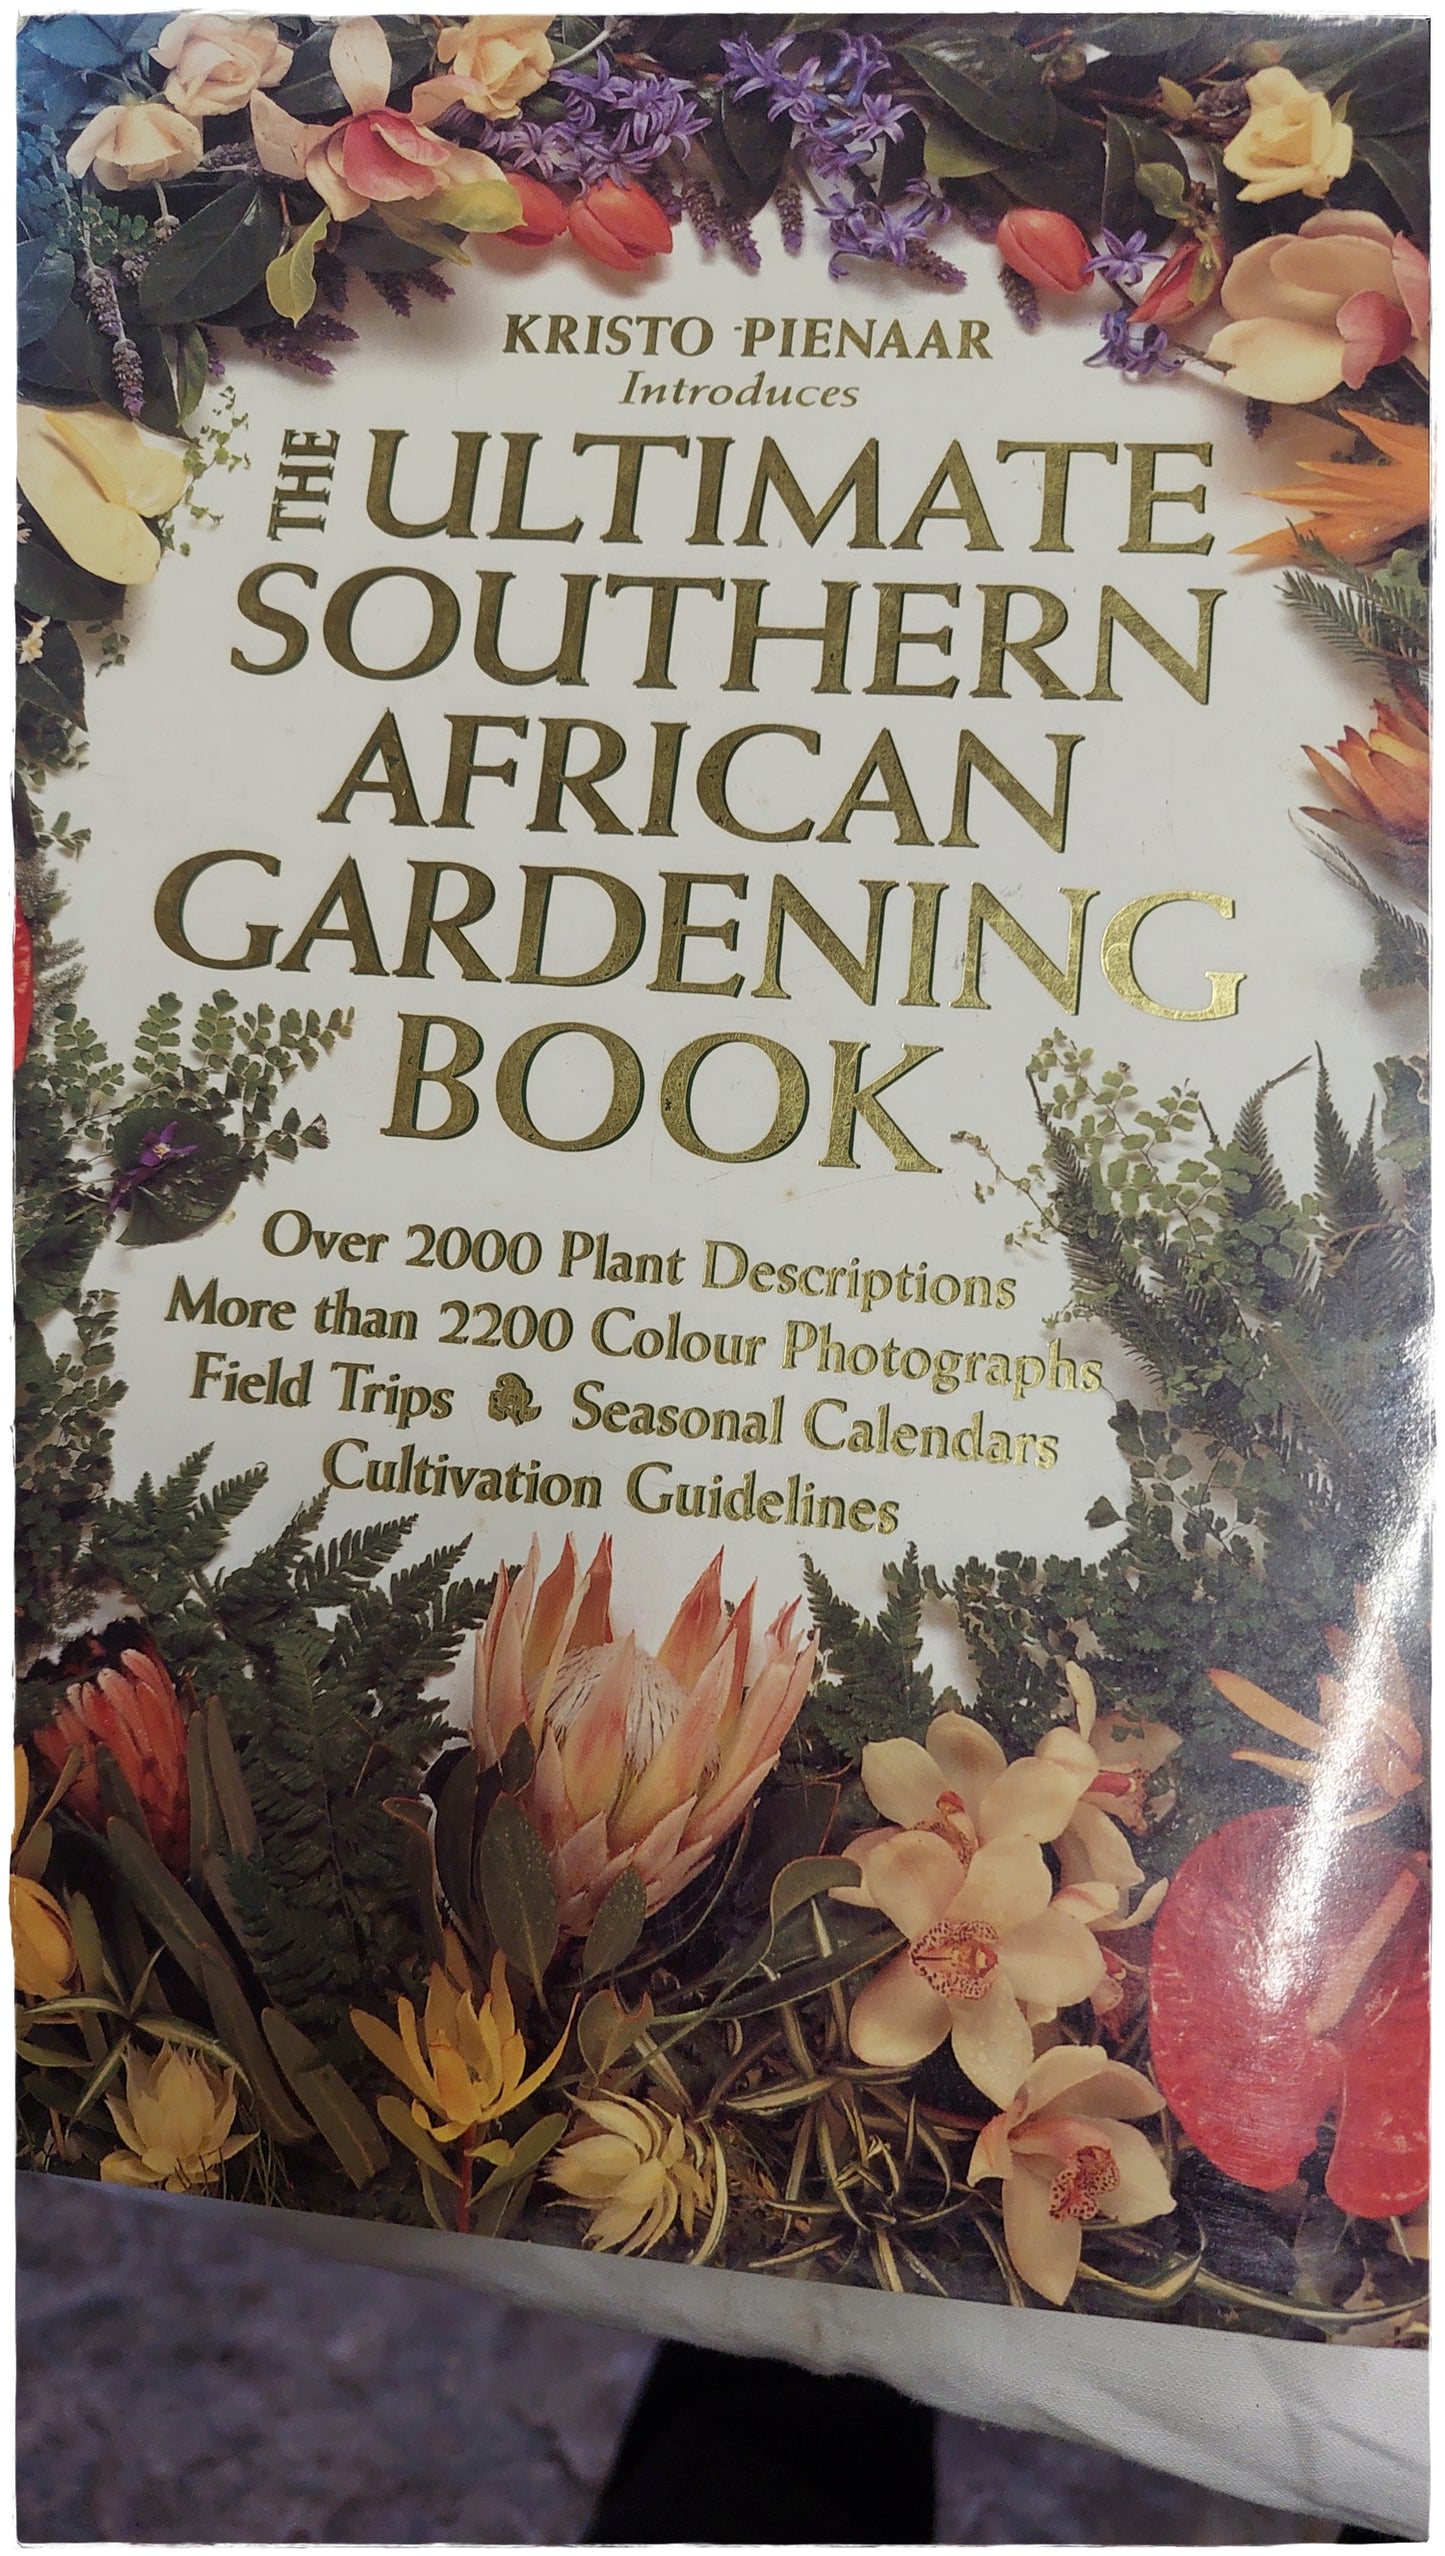 The Ultimate South African Gardening Book